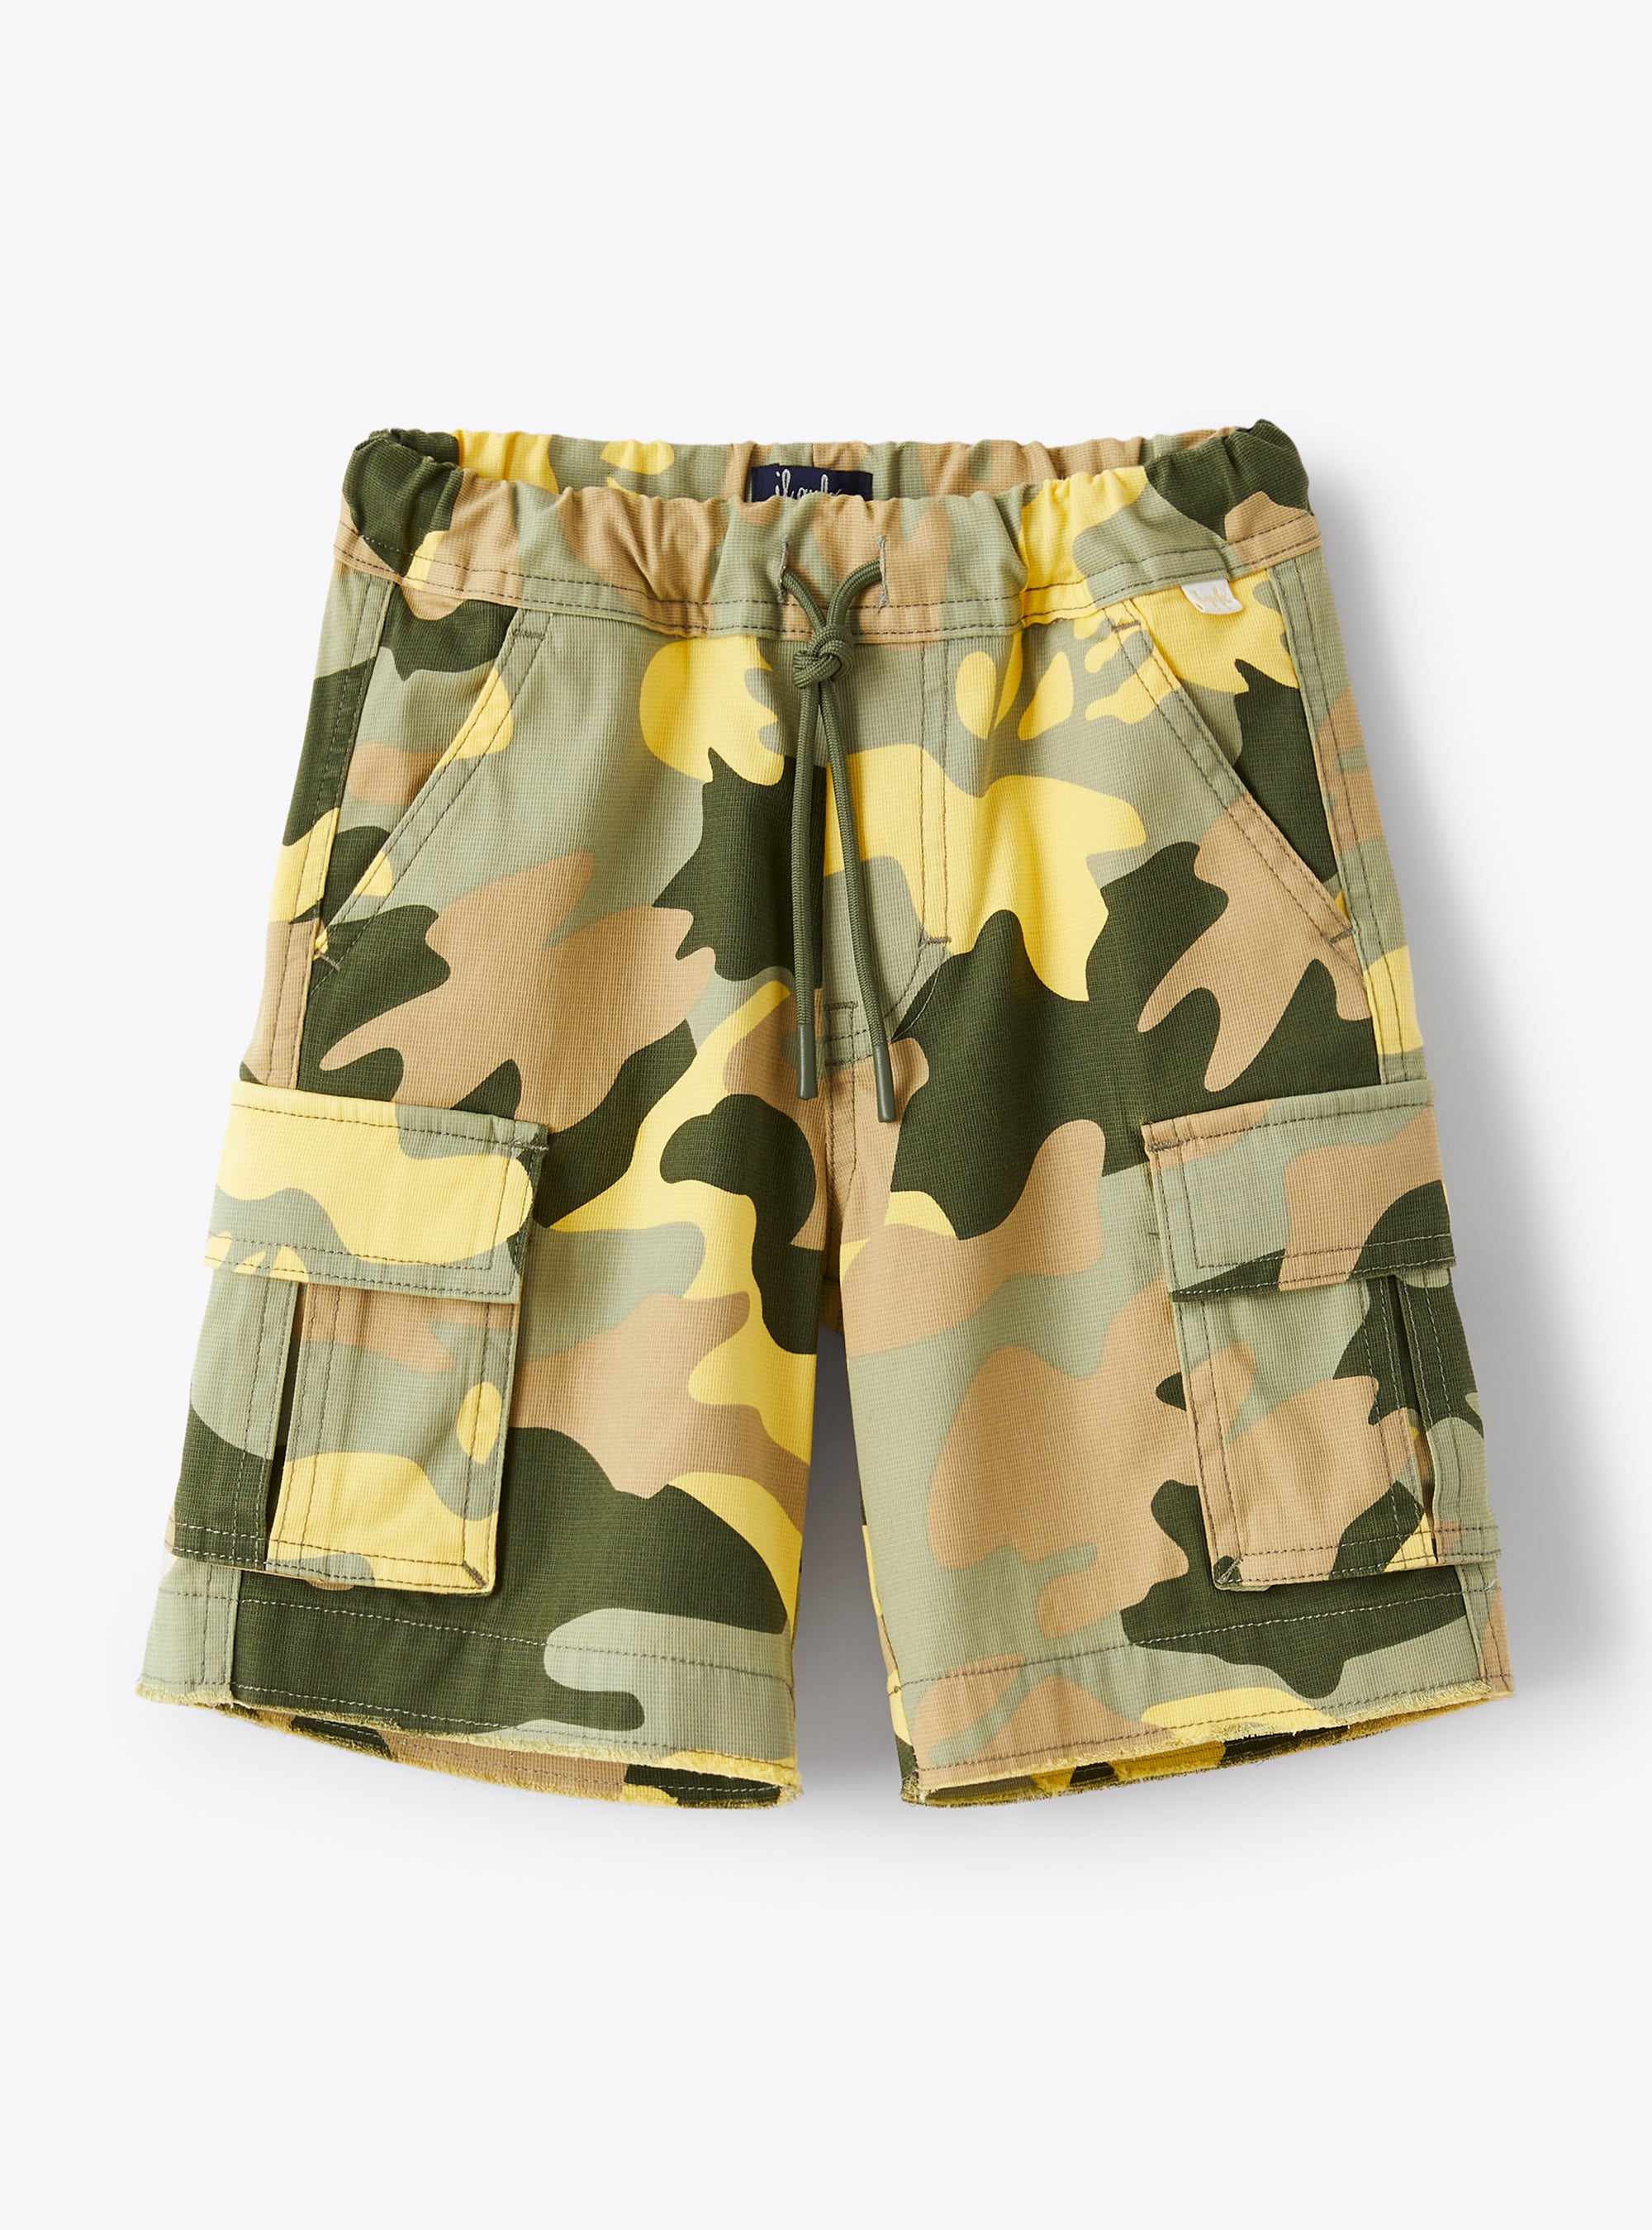 Bermuda shorts in camouflage-patterned canvas - Trousers - Il Gufo